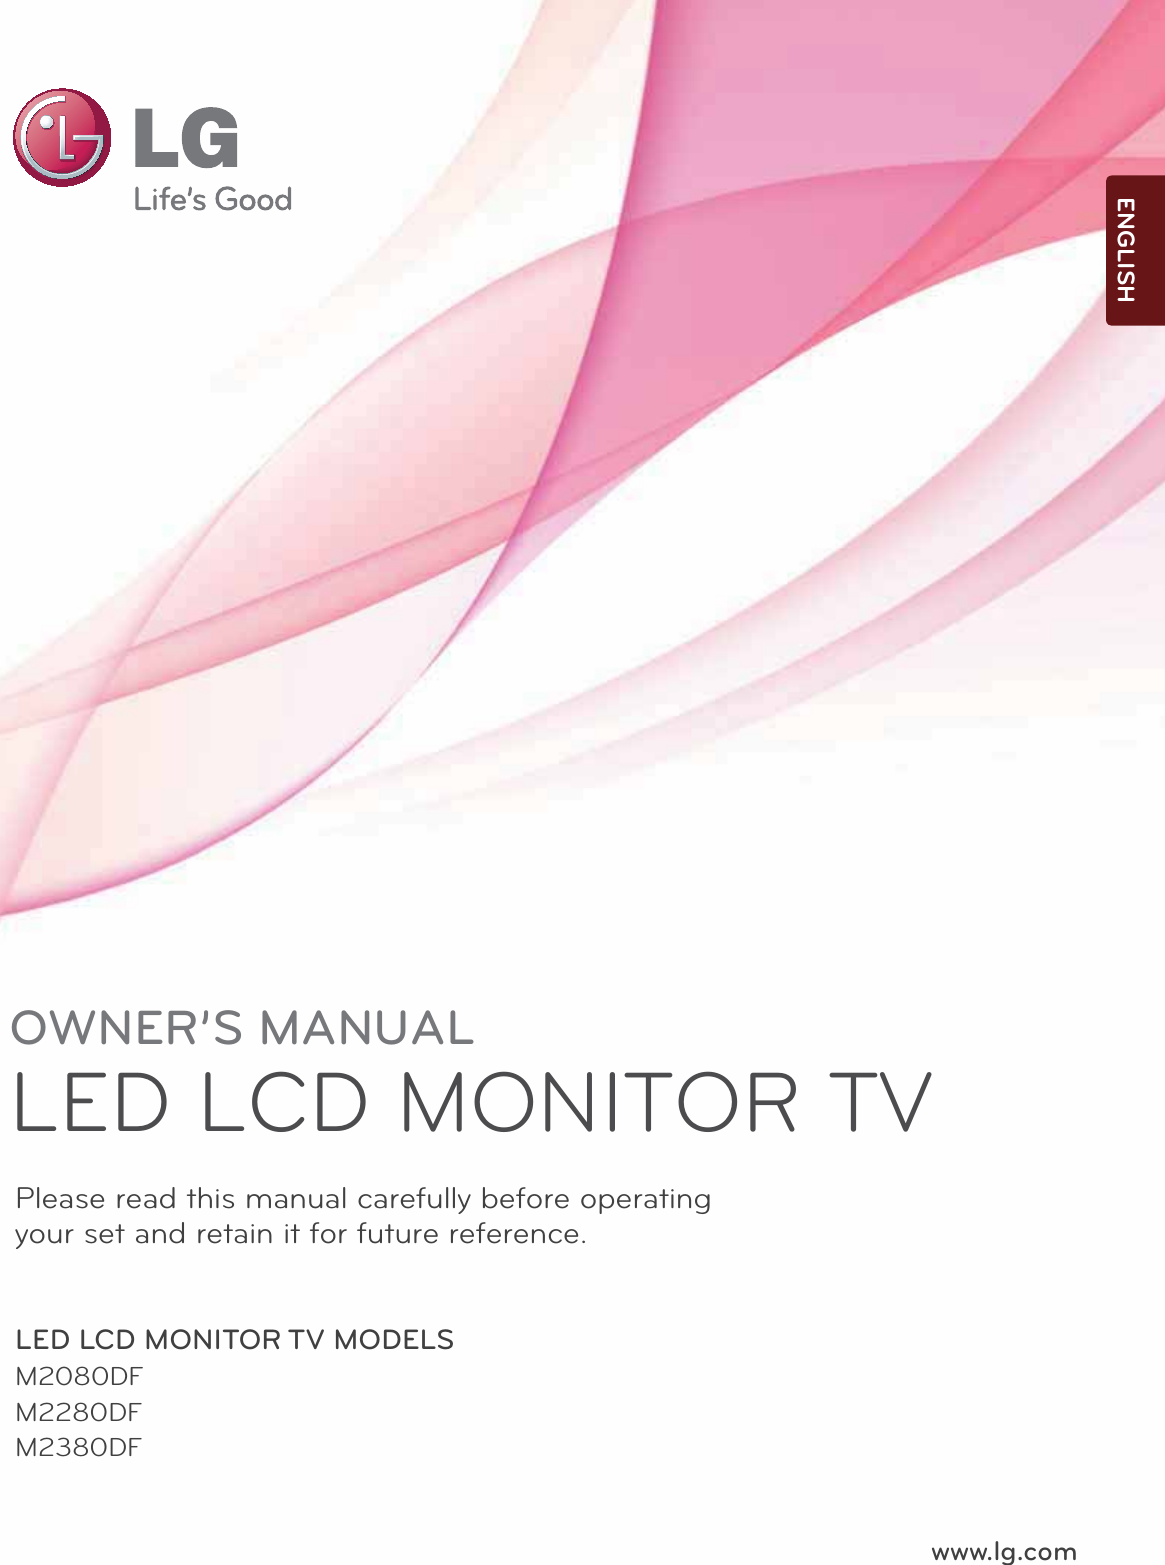 www.lg.comOWNER’S MANUALLED LCD MONITOR TVLED LCD MONITOR TV MODELSM2080DFM2280DFM2380DFPlease read this manual carefully before operatingyour set and retain it for future reference.ENGLISH